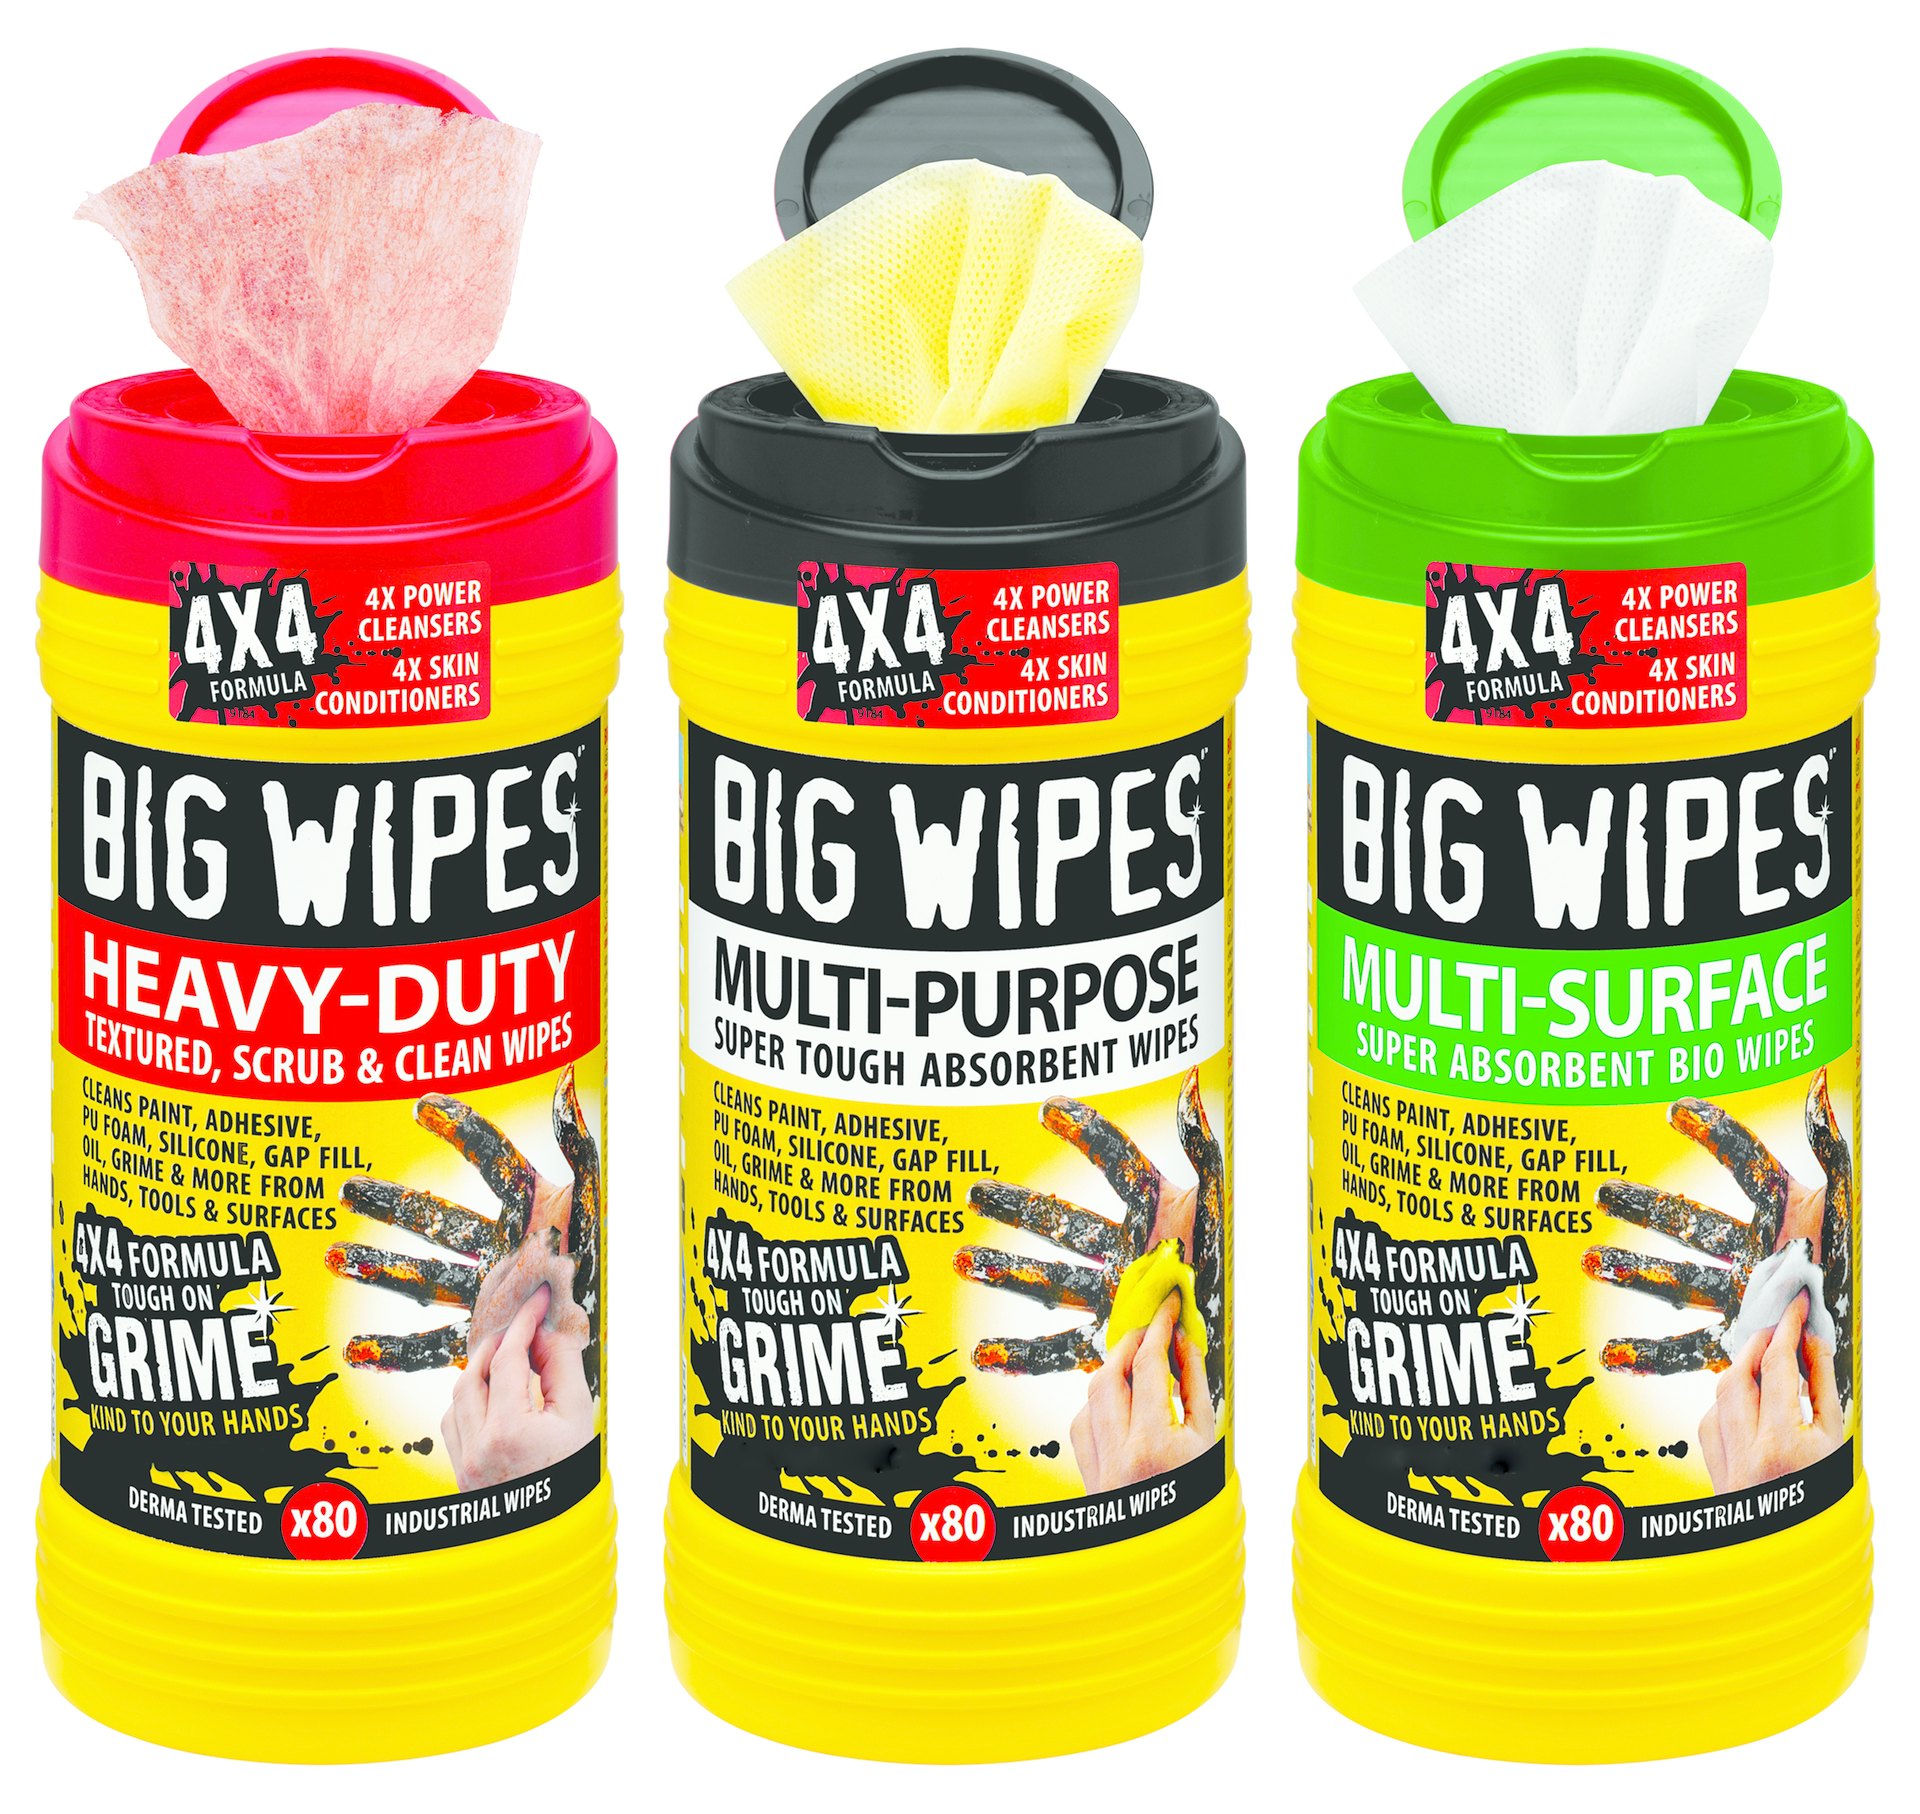 Big Wipes 4x4 Cleaning Wipes Now FDA Registered - Contractor